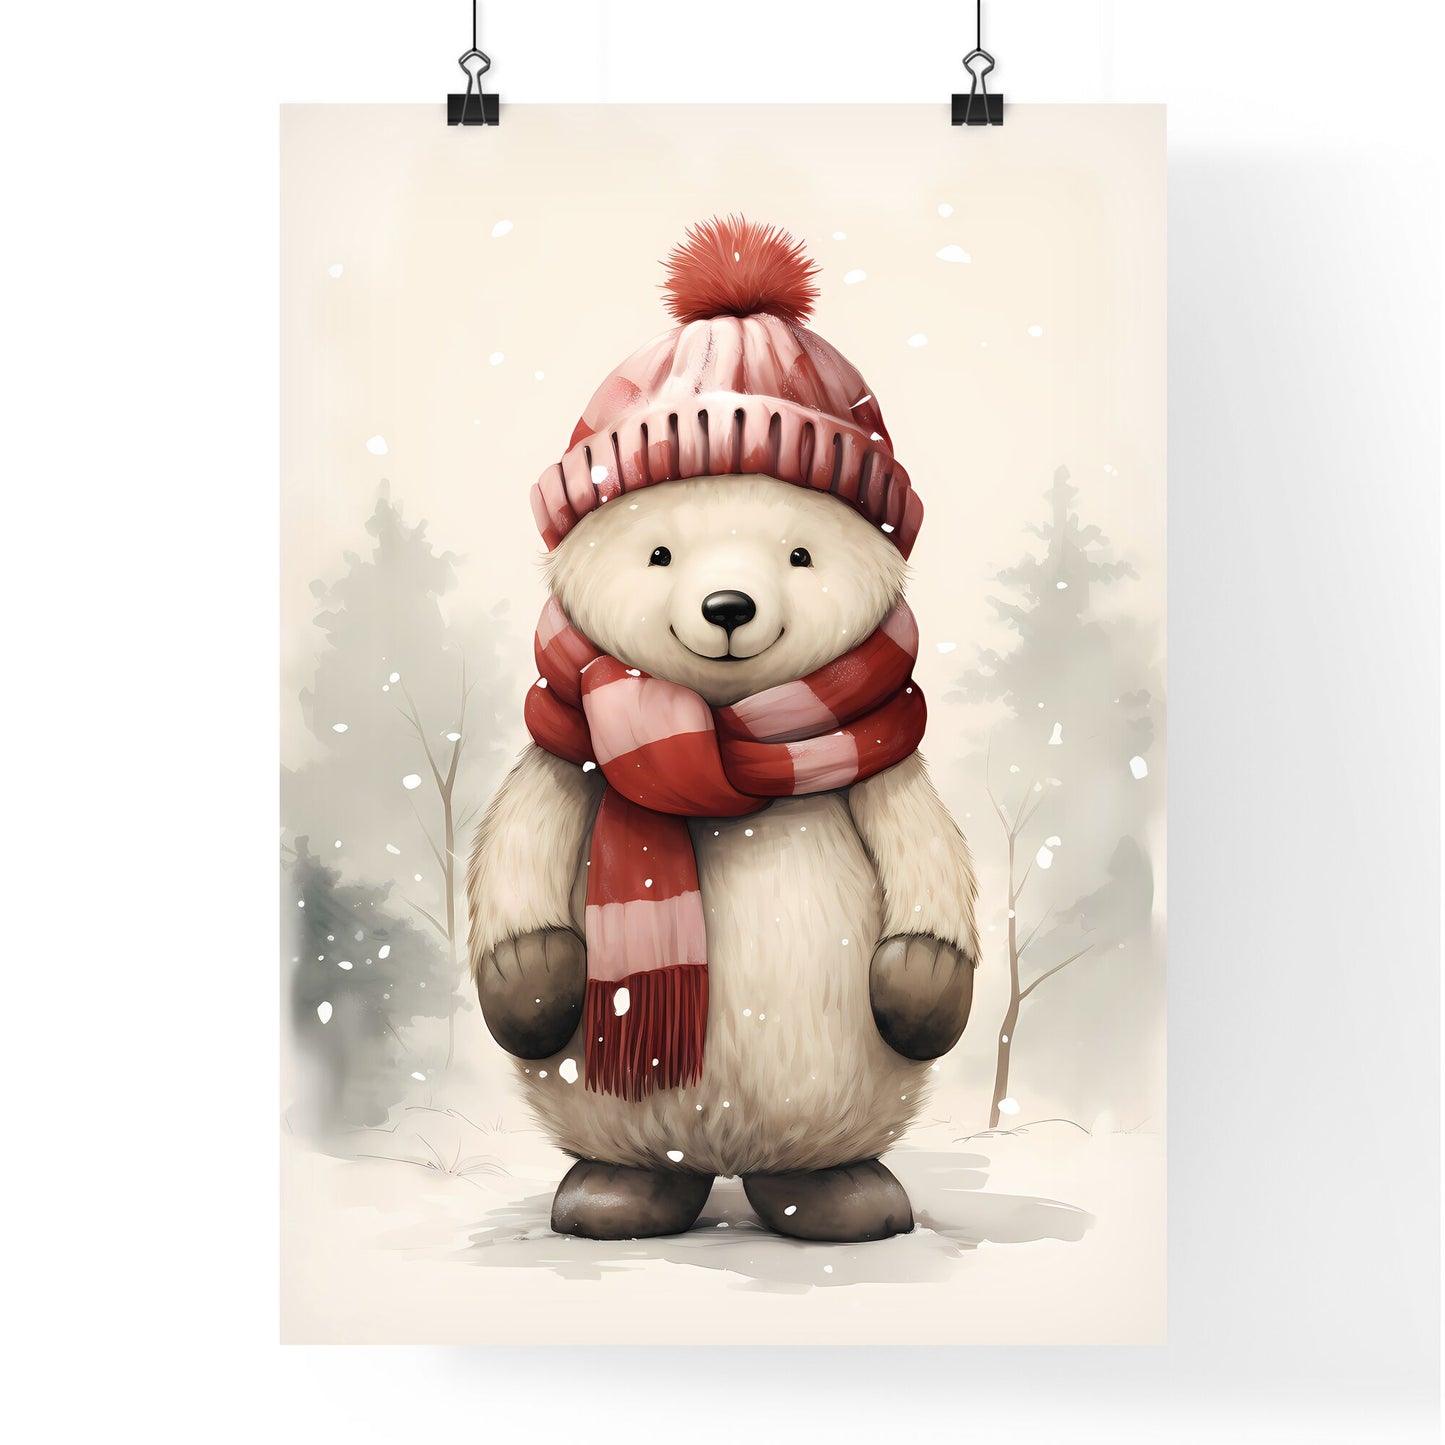 Winter Times - A Cartoon Of A Teddy Bear Wearing A Hat And Scarf Default Title